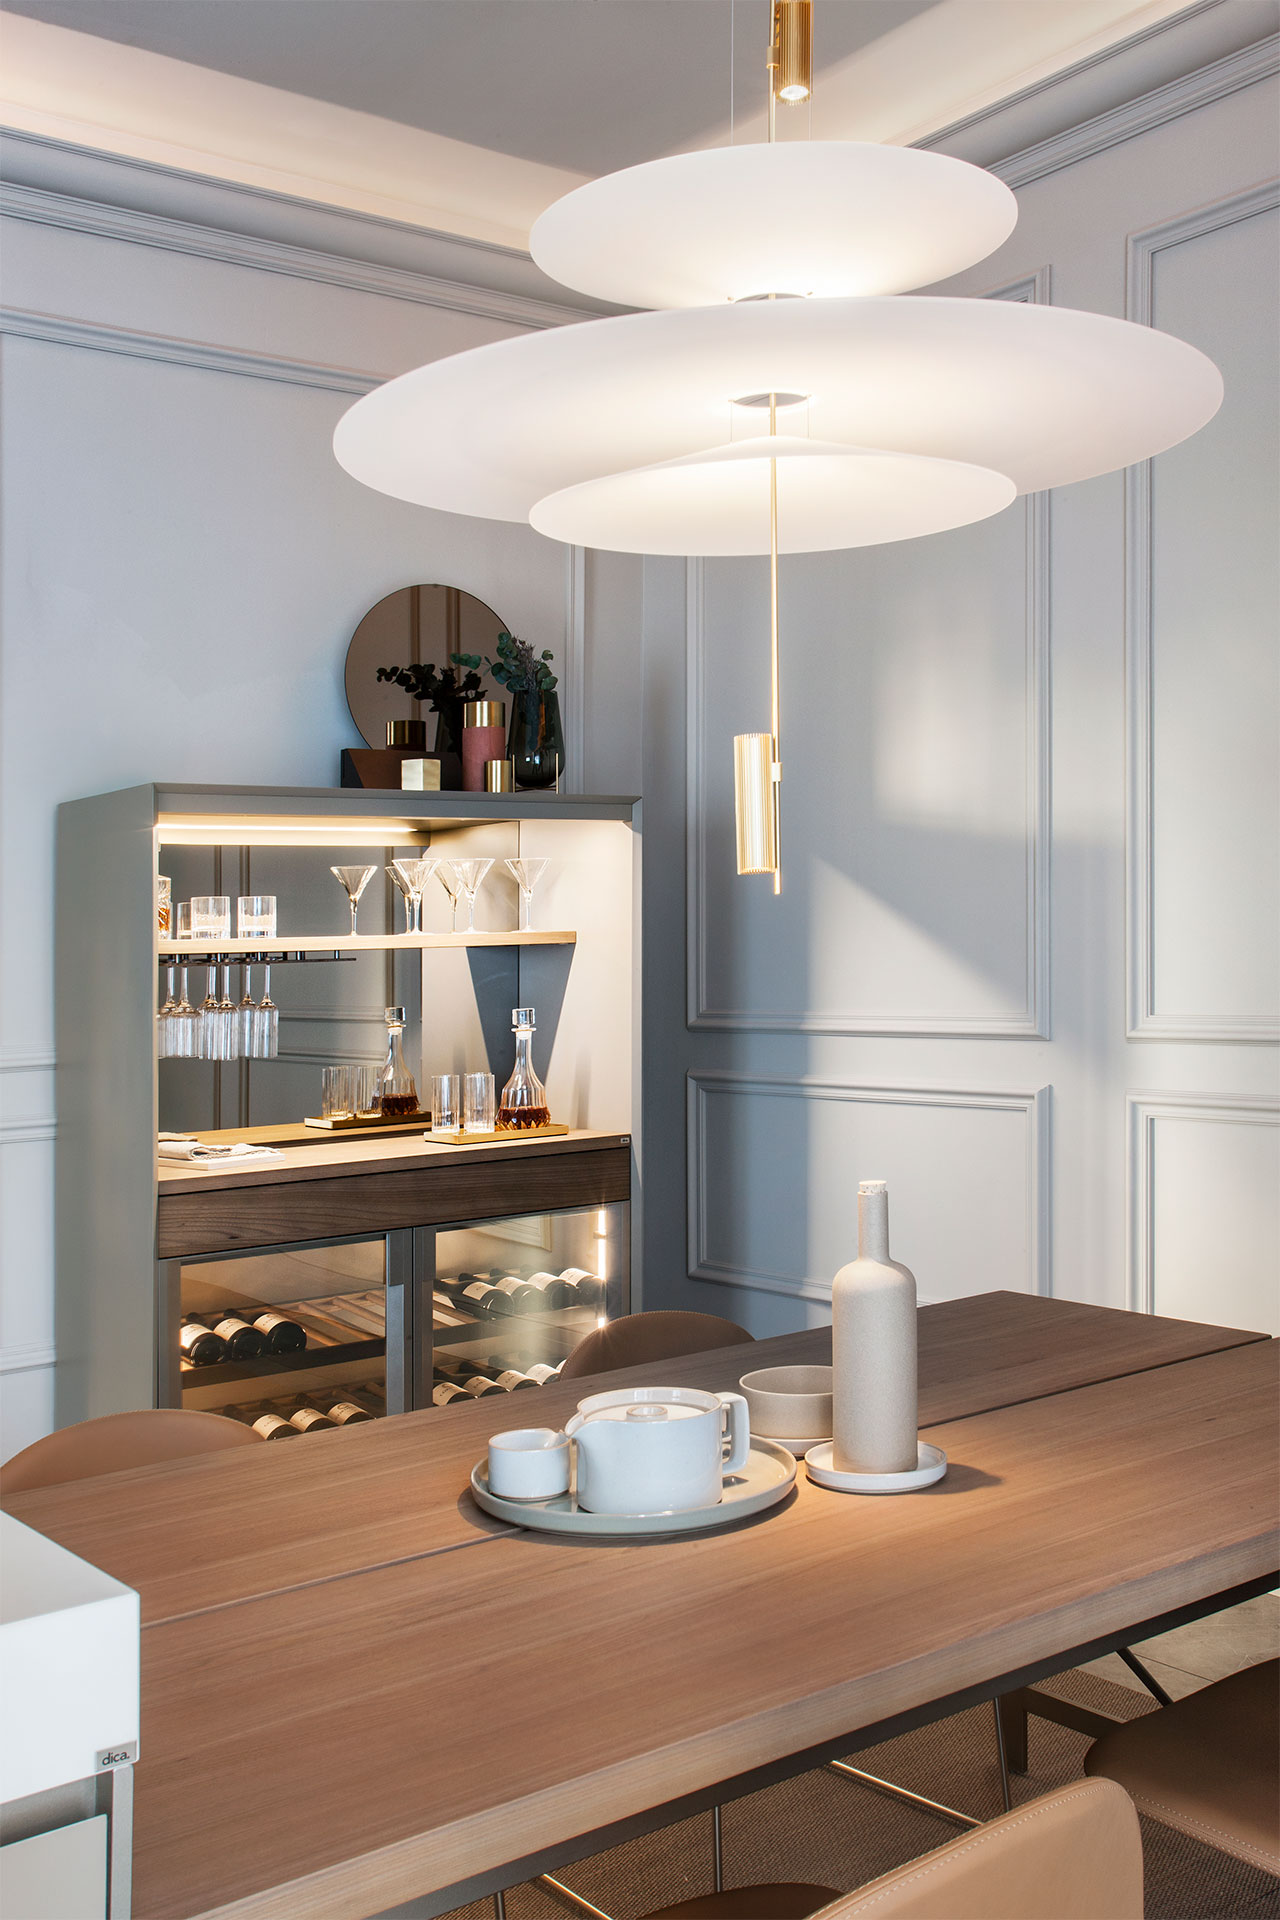 Vibia The Edit - Vibia Lighting Takes Centre Stage in Kitchen Designs - Flamingo